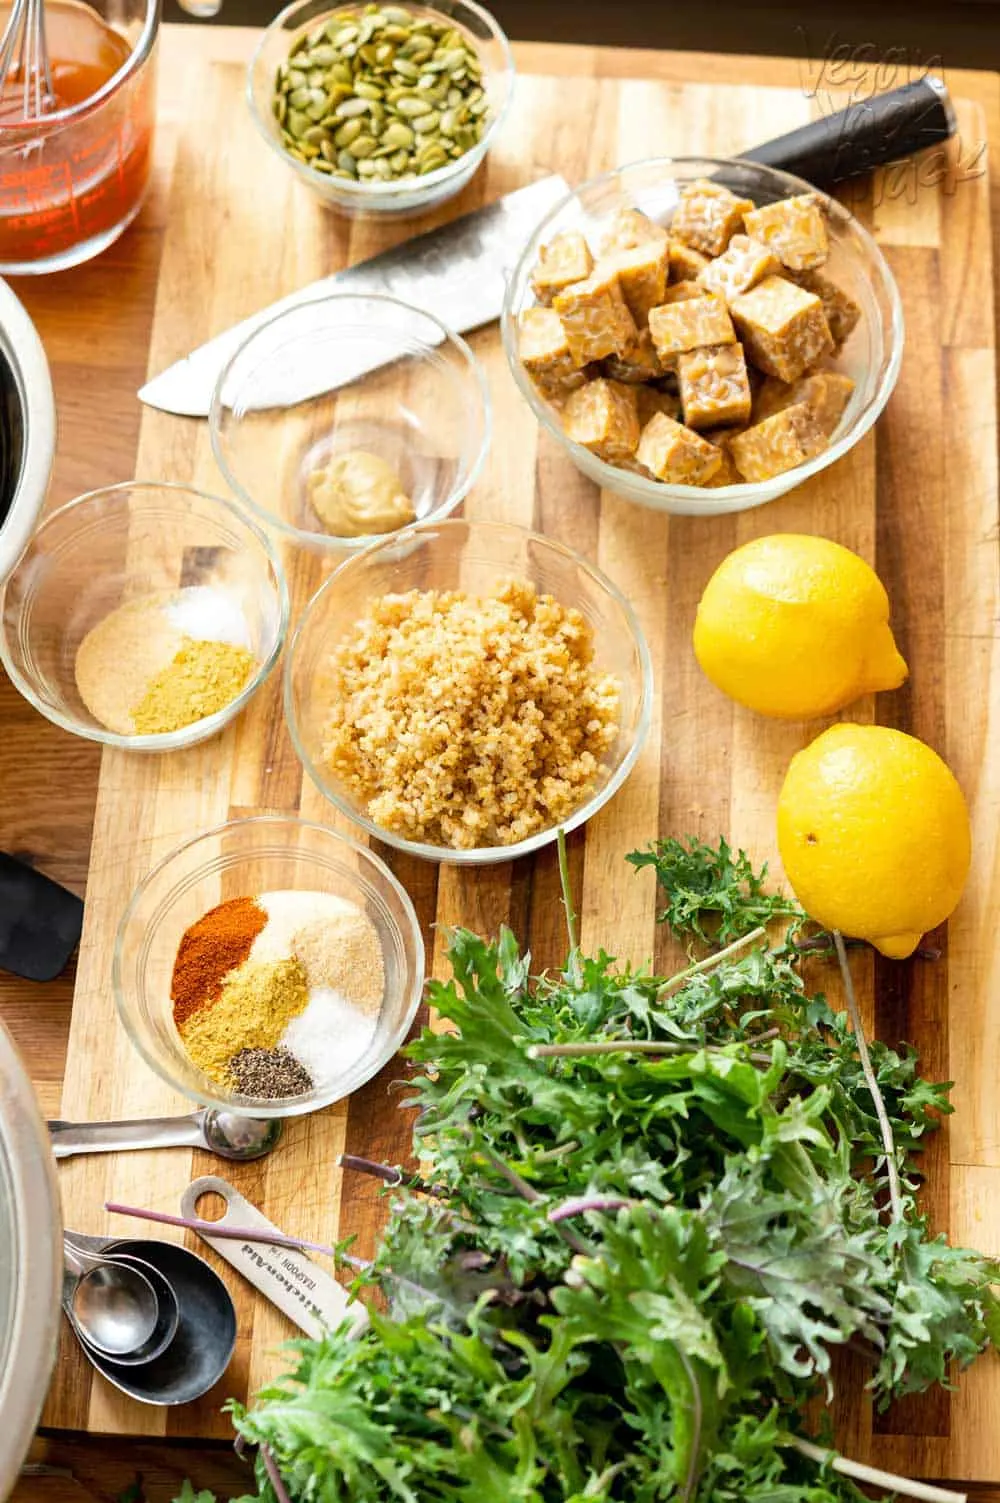 Ingredients such as tempeh, lemon, quinoa, spices, kale, and more laid out on a cutting board